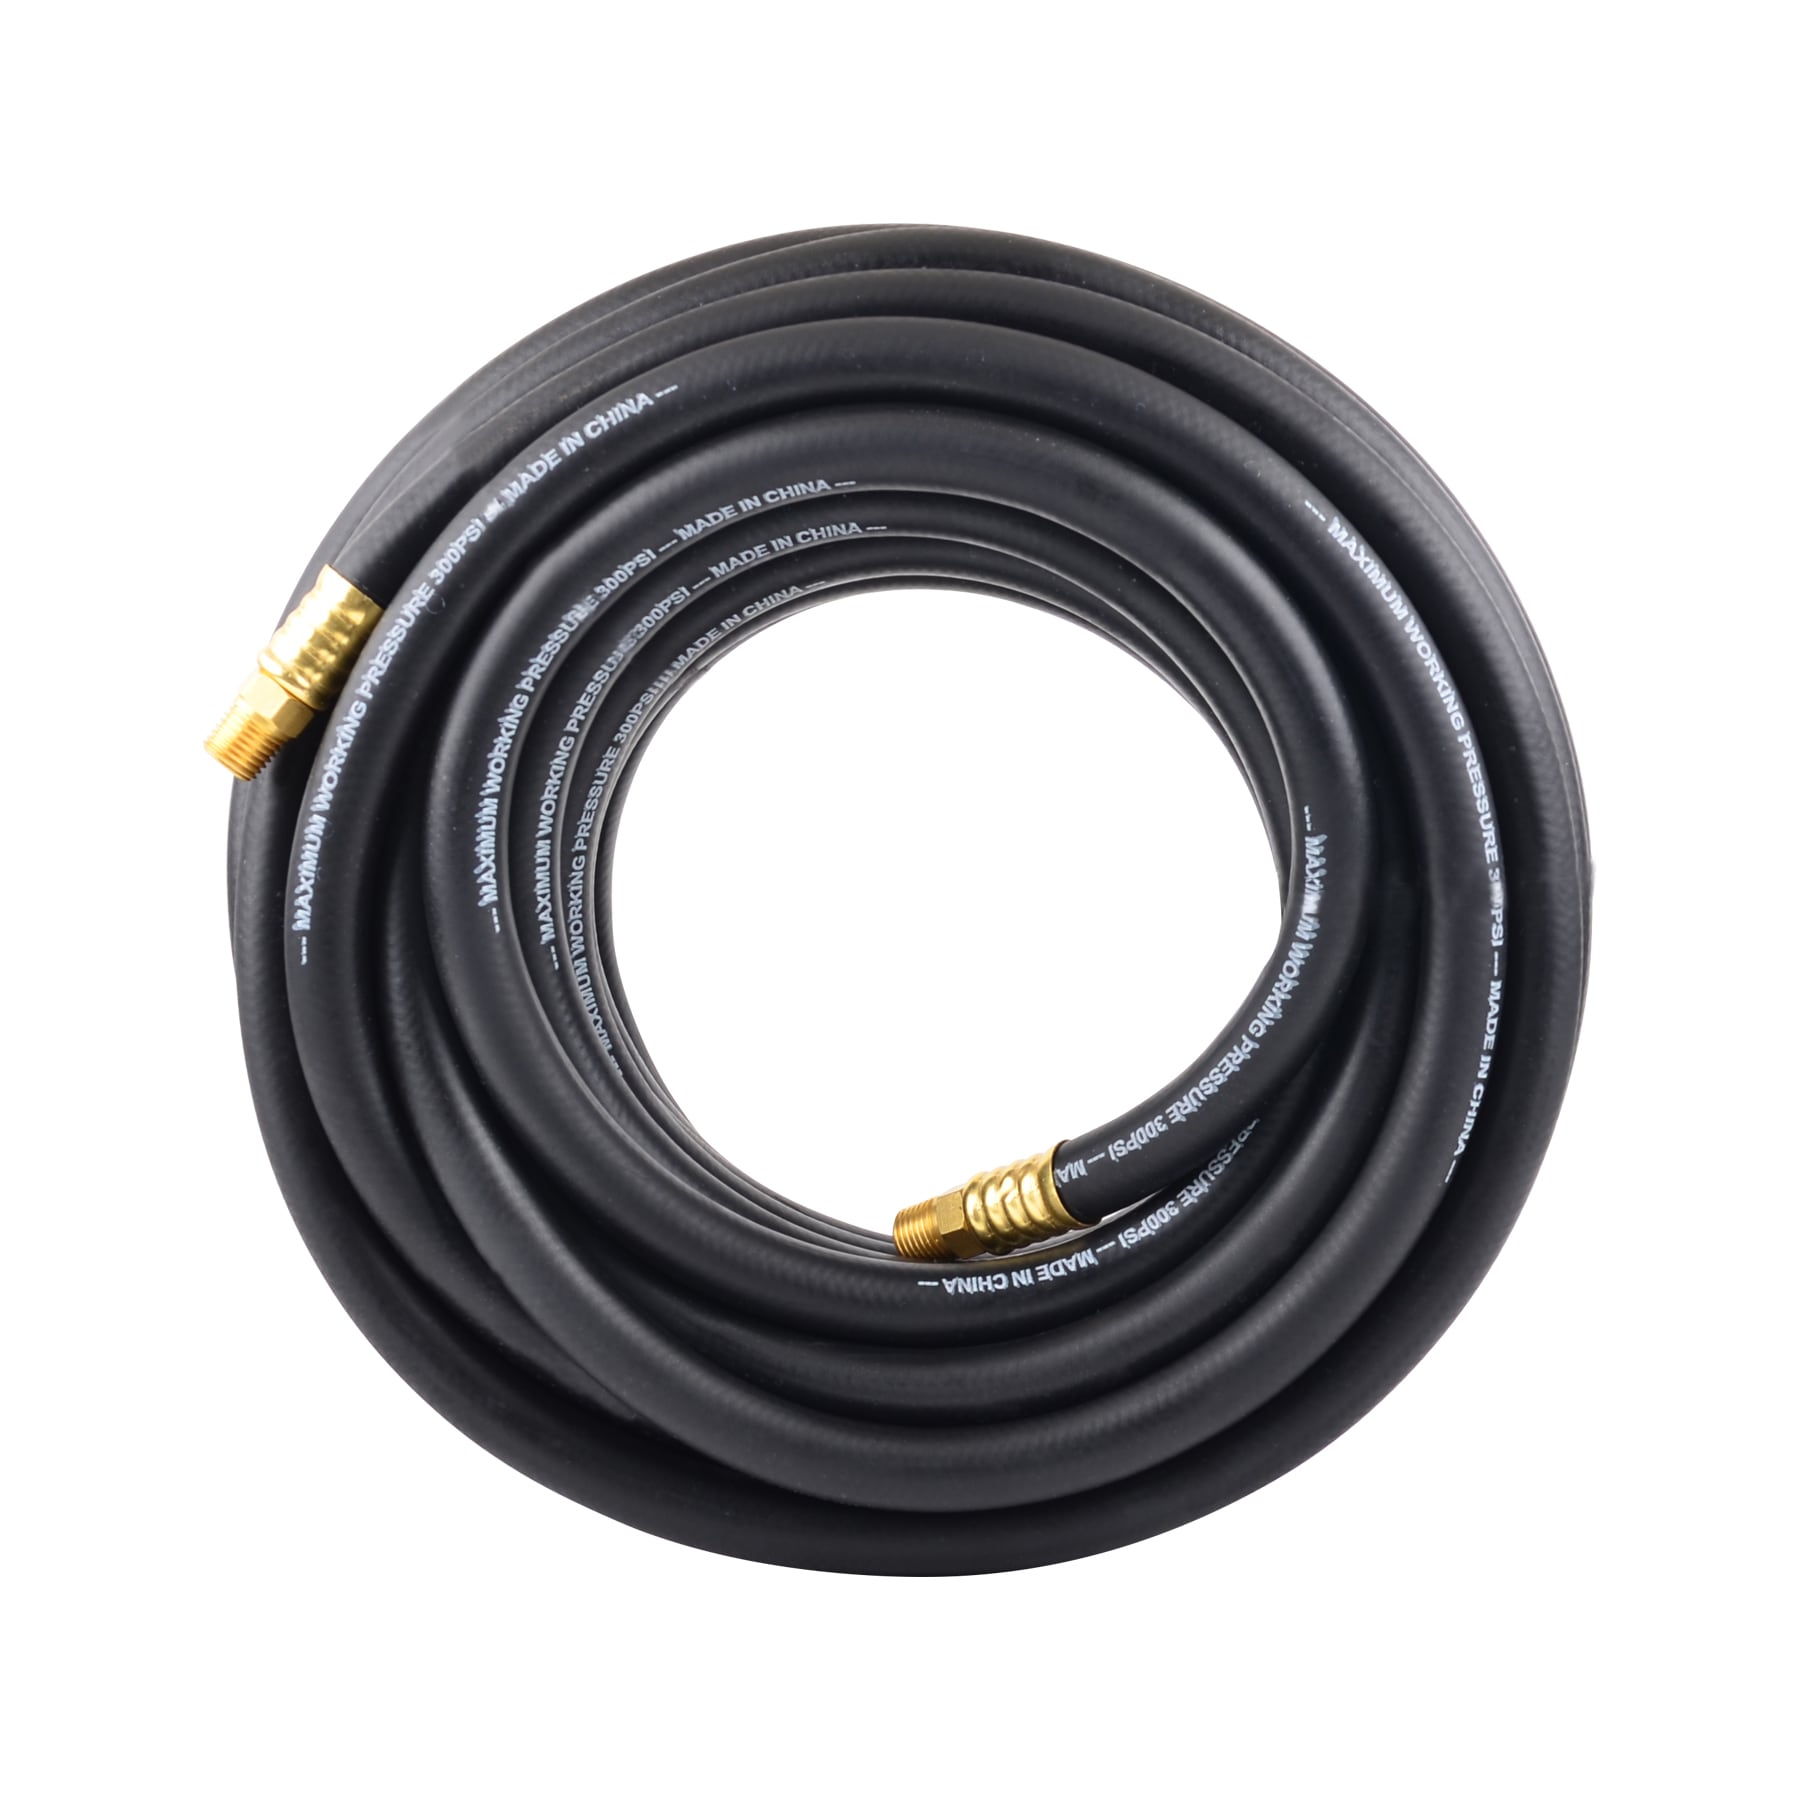 CRAFTSMAN Craftsman 1/4-in x 50' Polyurethane Hose in the Air Compressor  Hoses department at